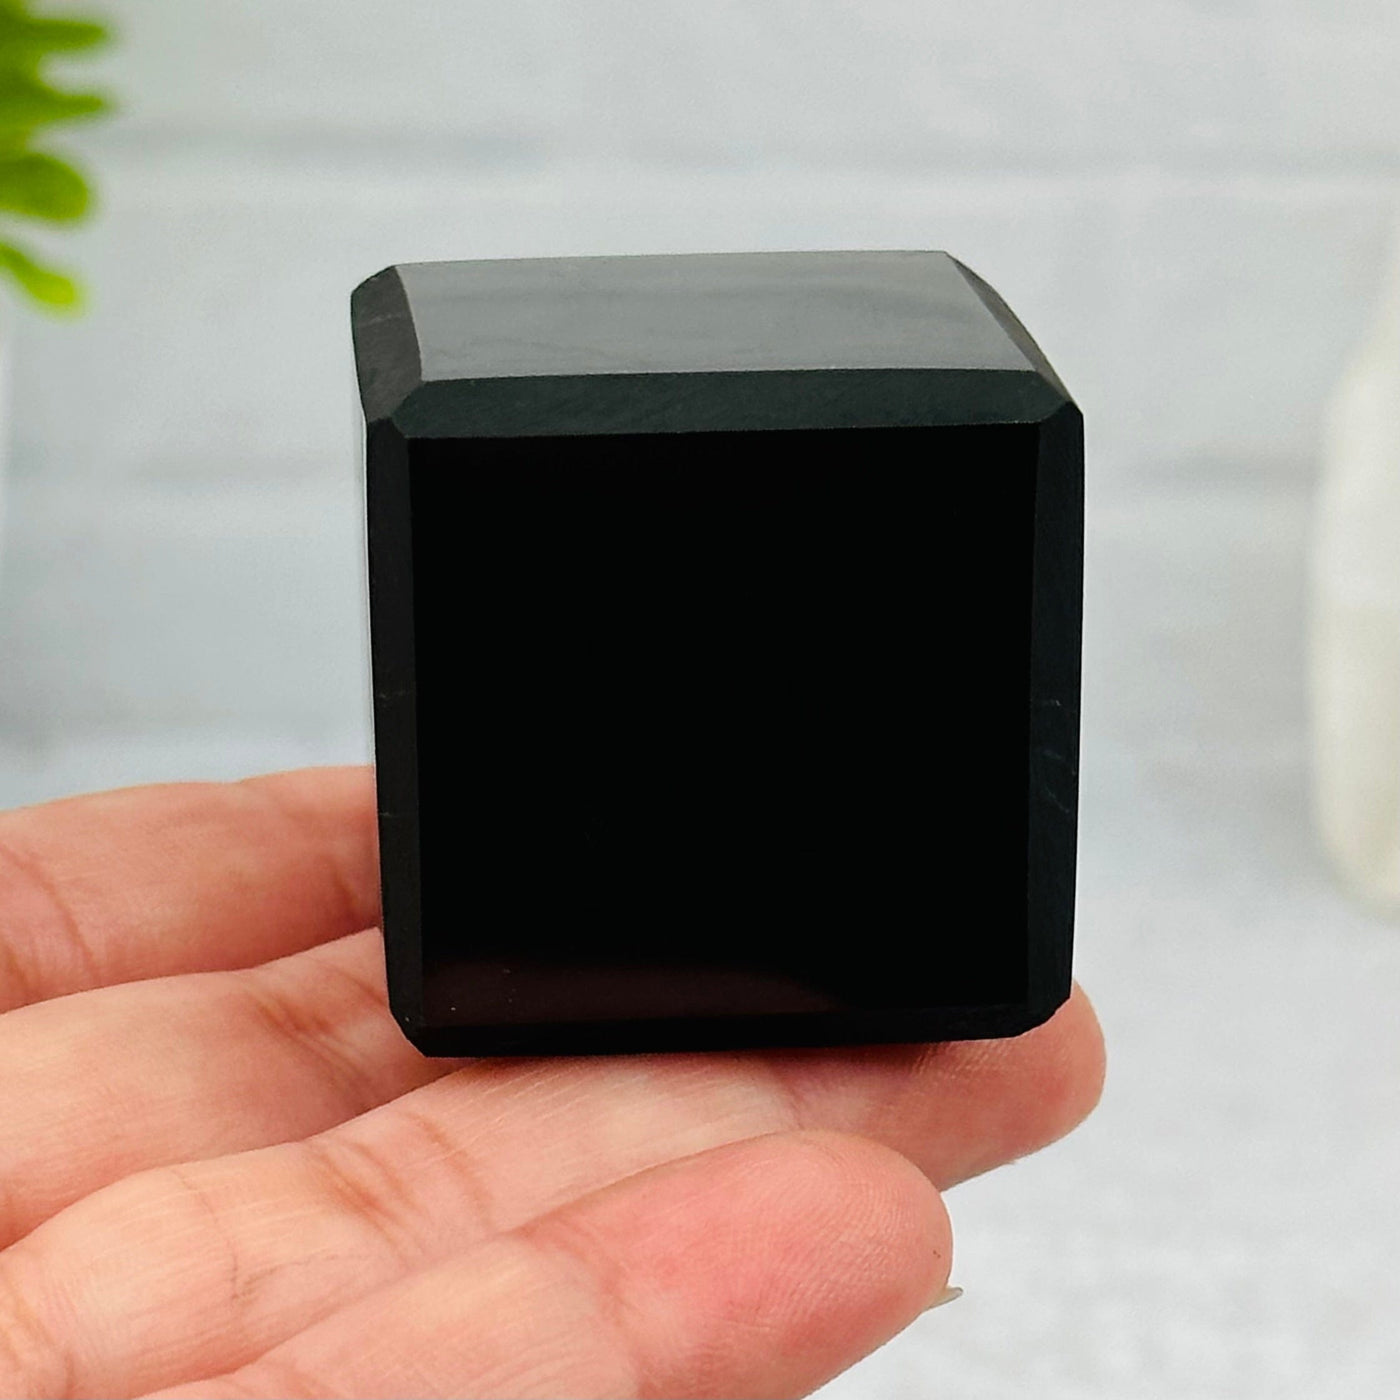 3cm shungite cube in hand for size reference 